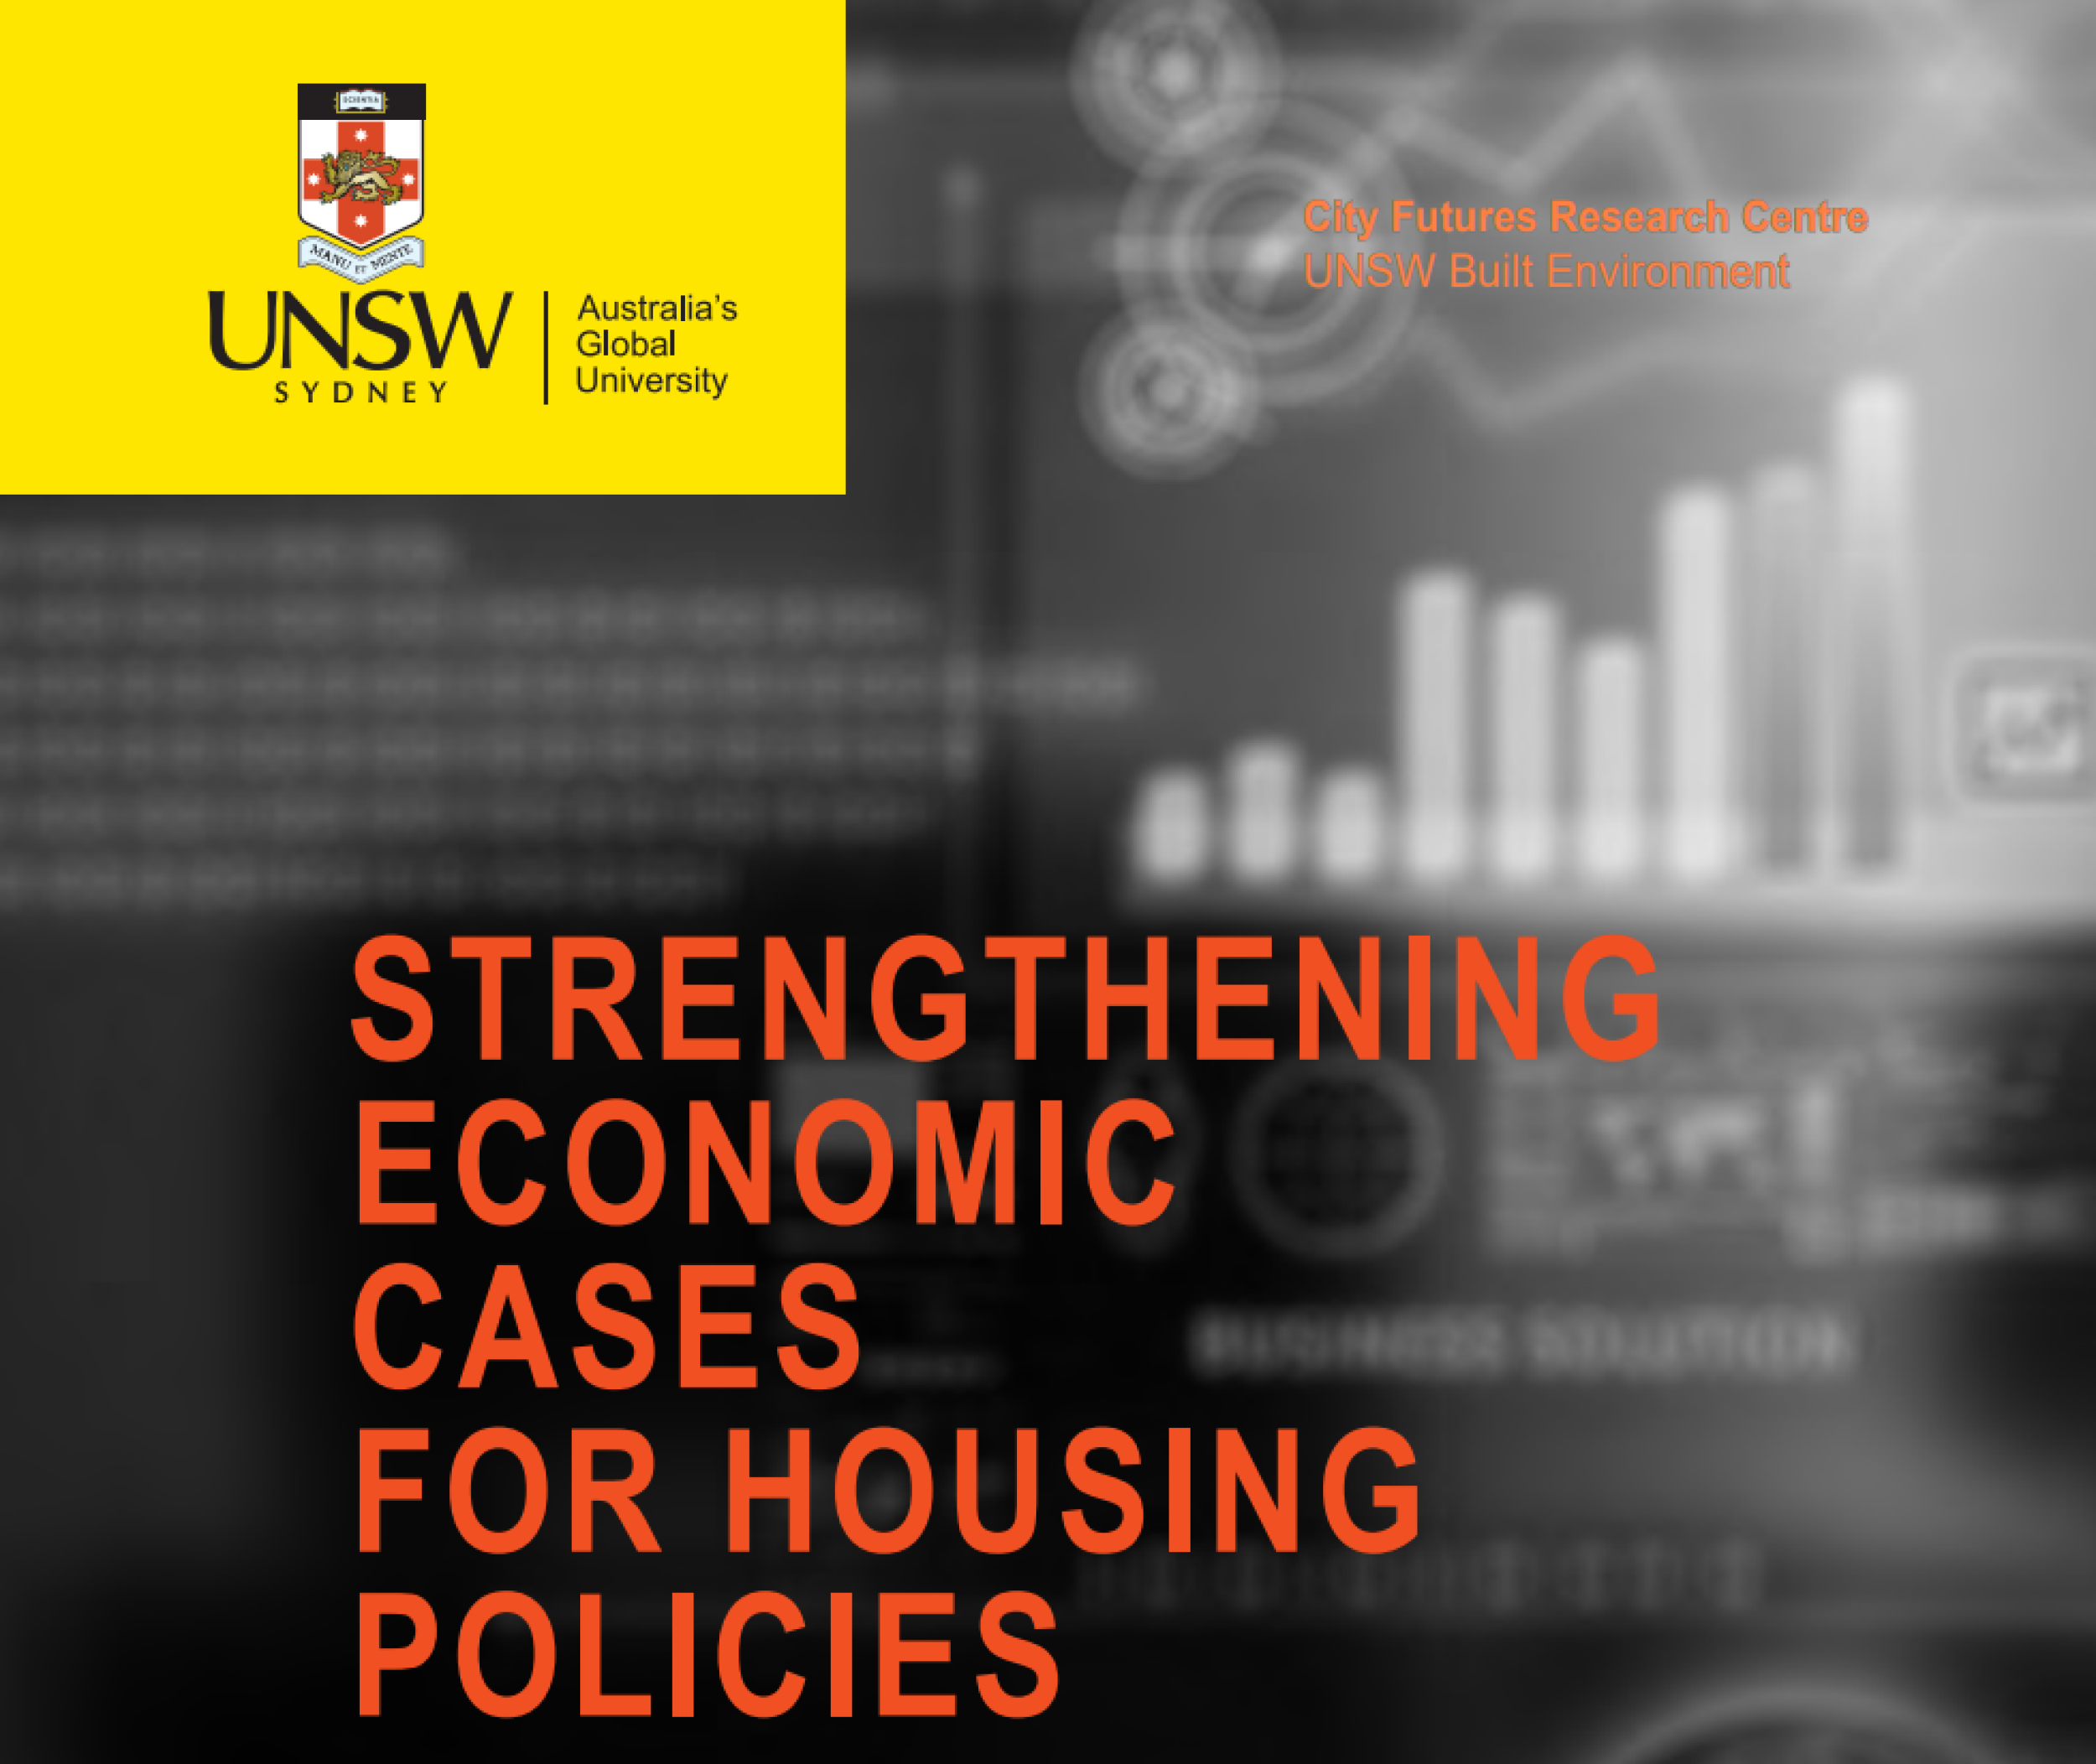 SGS Economics and Planning UNSW cases for housing policies